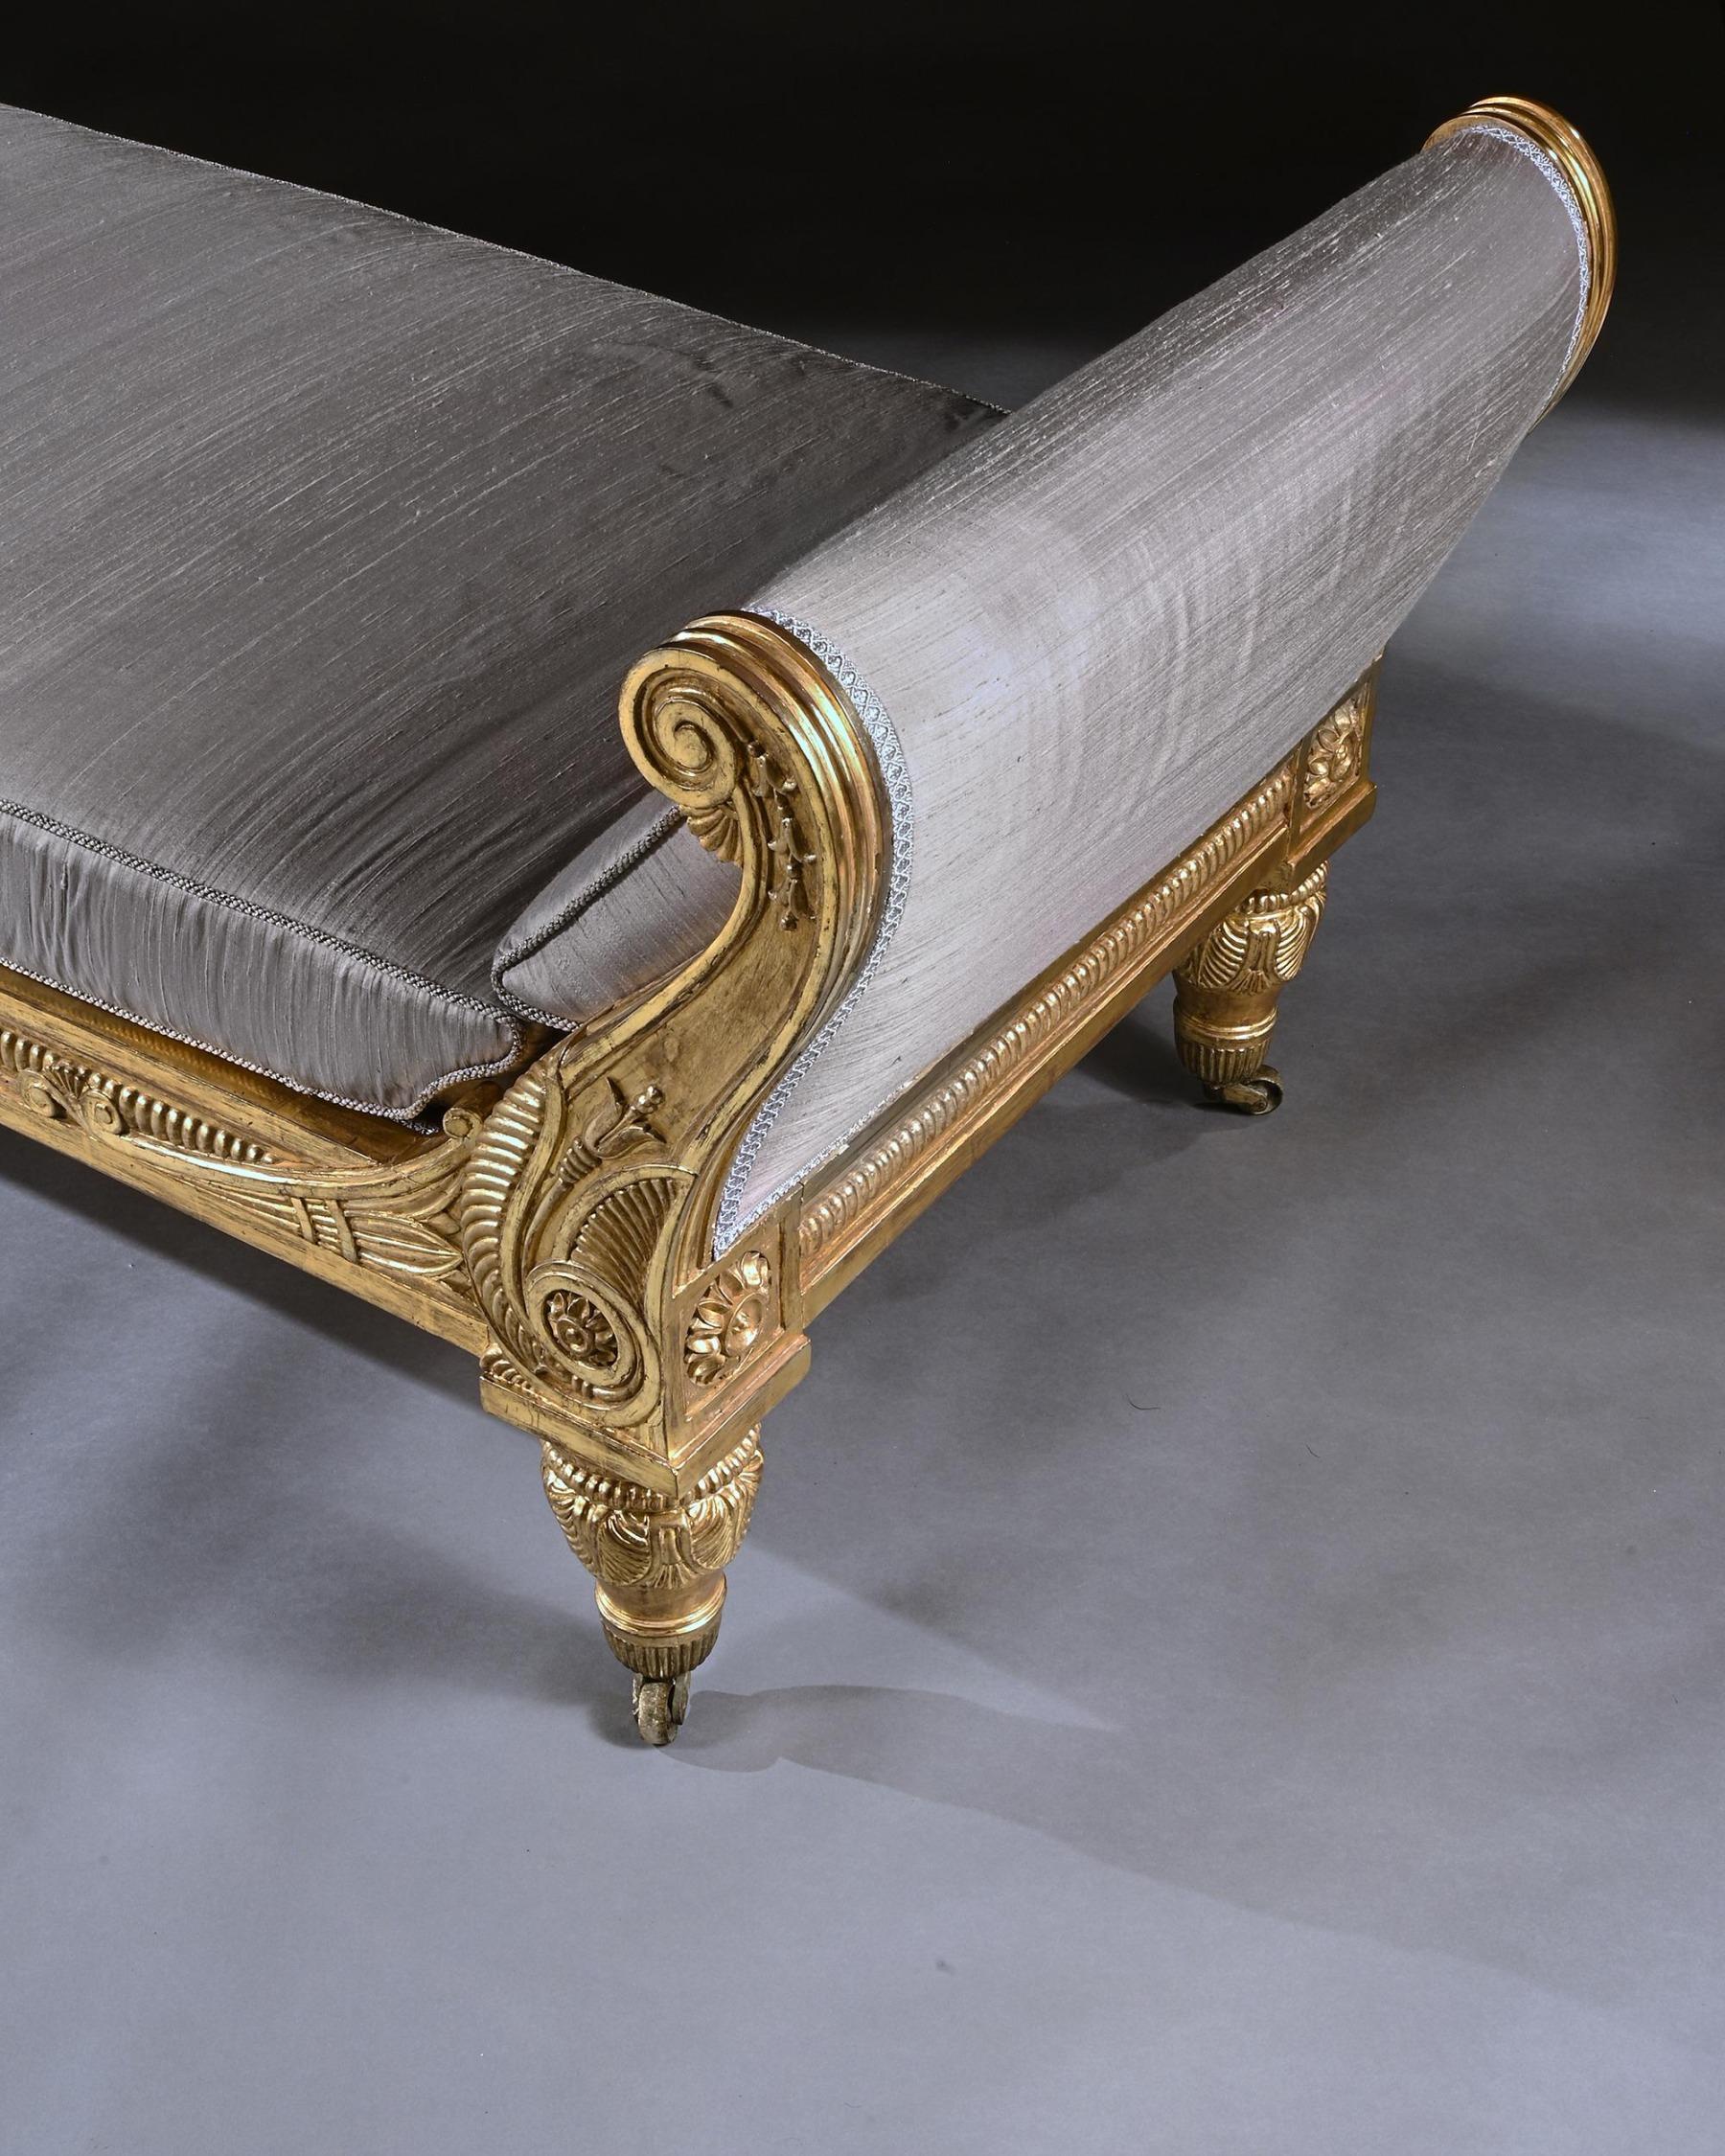 Provenance 
Very likely part of the suite commissioned by the Duke of Beaufort for the Great Drawing Room in Badminton House when it was designed by Sir Jeffry Wyatville in 1811-12.

An extremely rare and elegant Grecian giltwood daybed from the